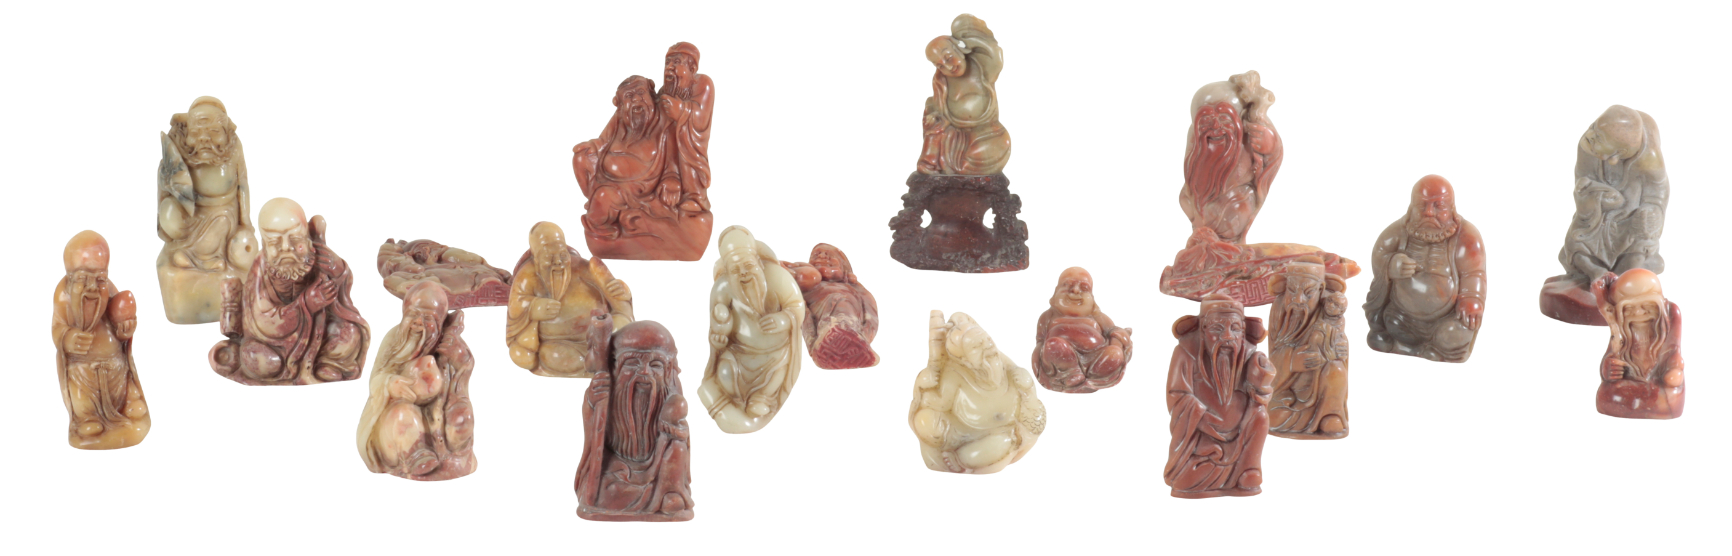 A LARGE COLLECTION OF CHINESE SOAPSTONE CARVINGS